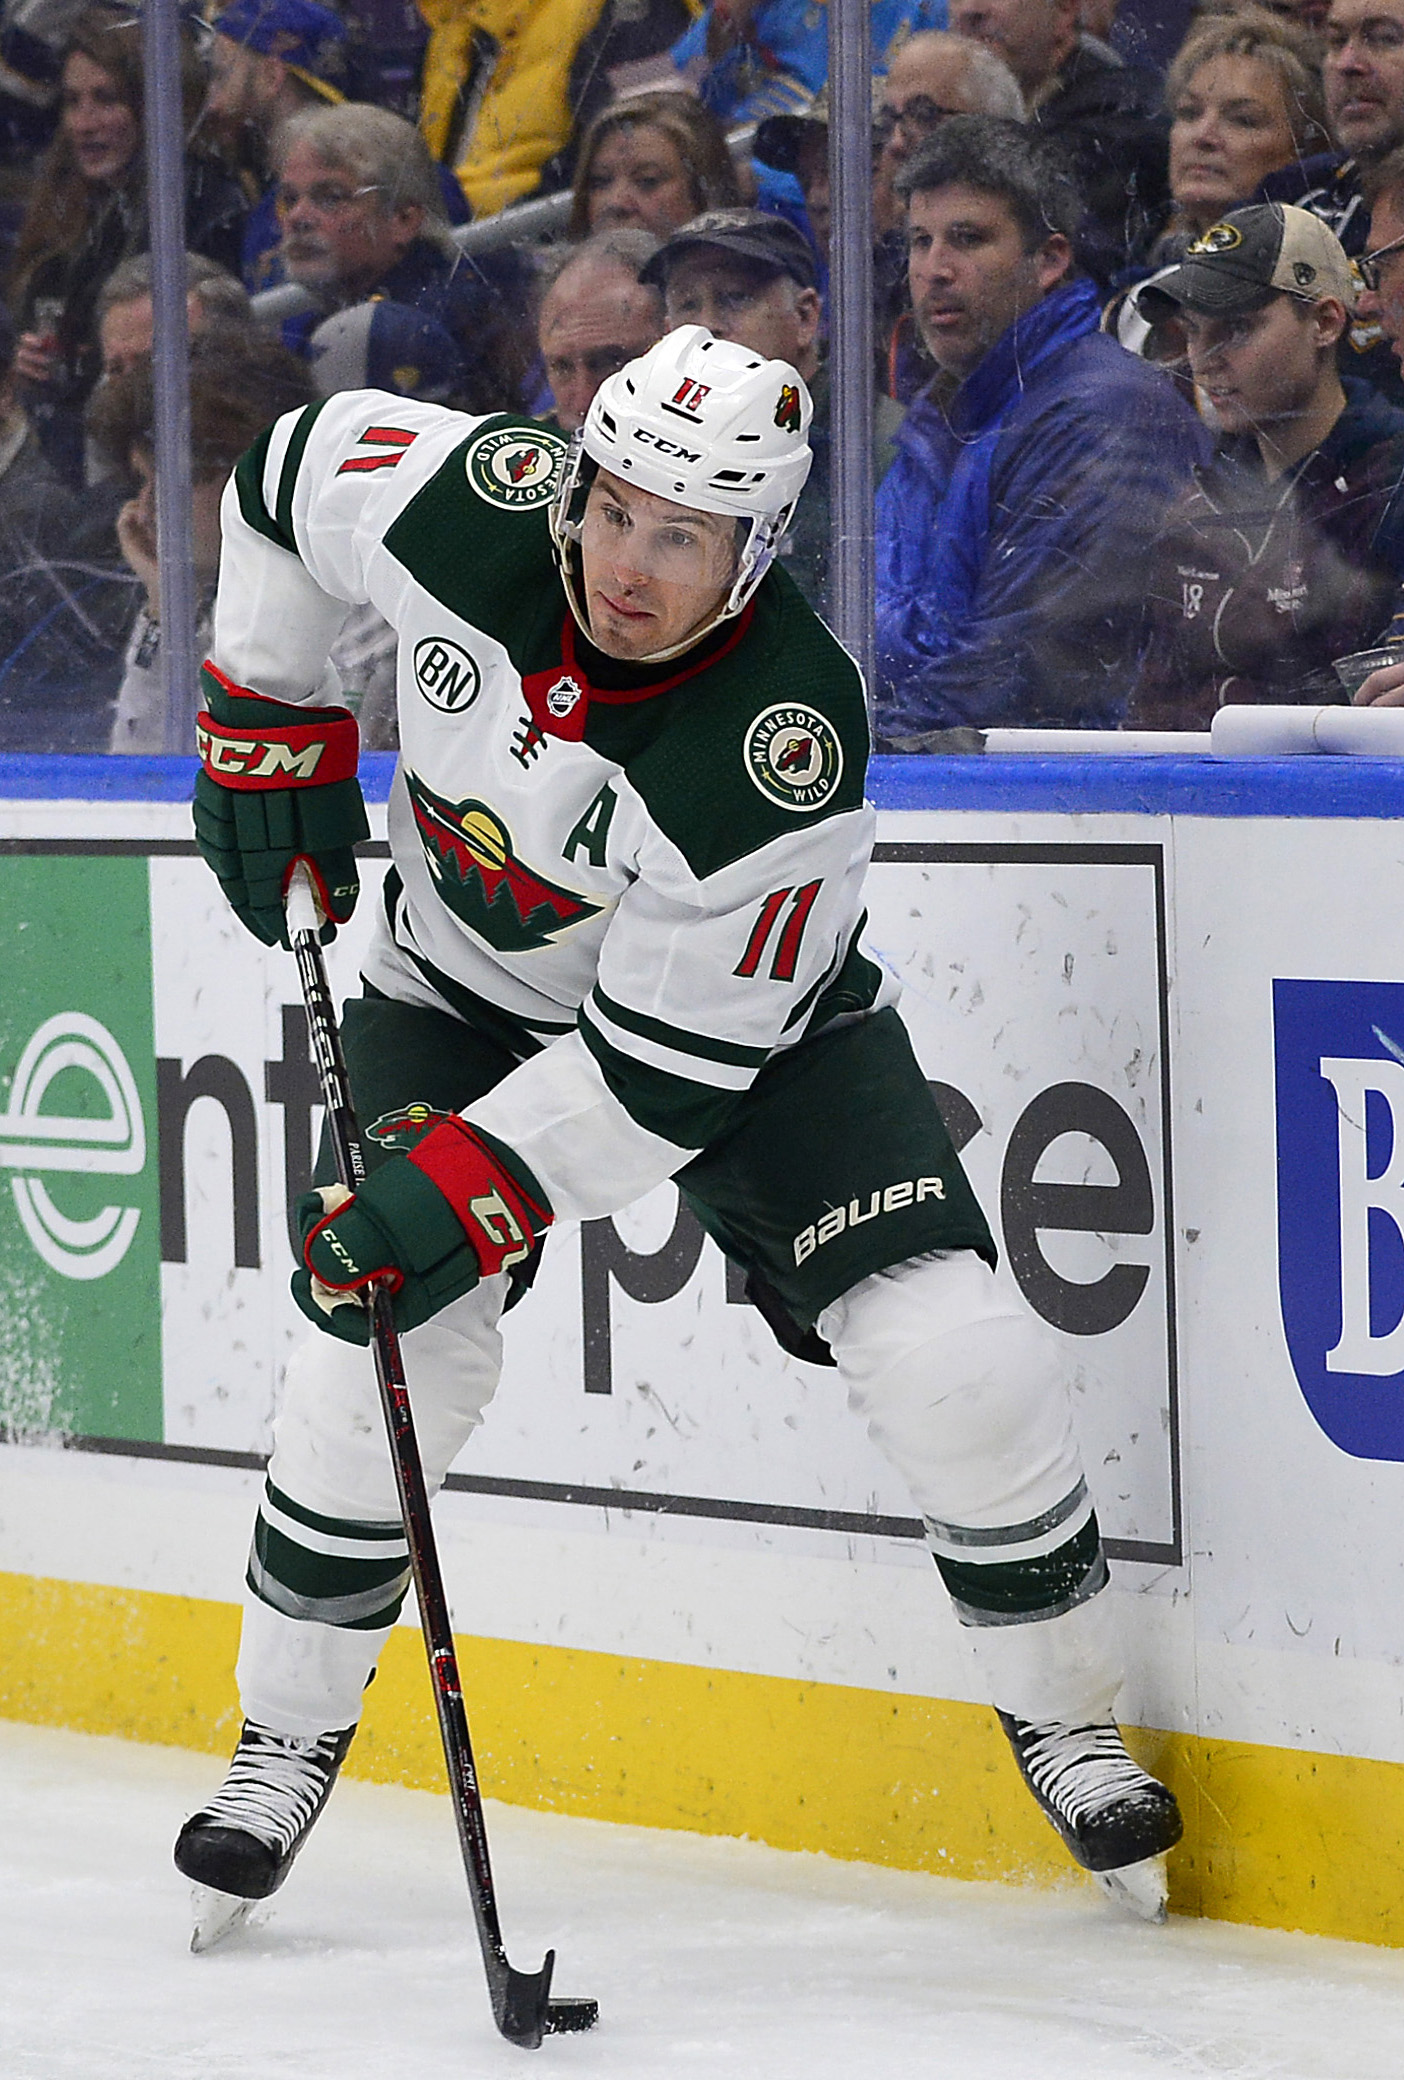 Parise healthy scratch for 1st time with Wild